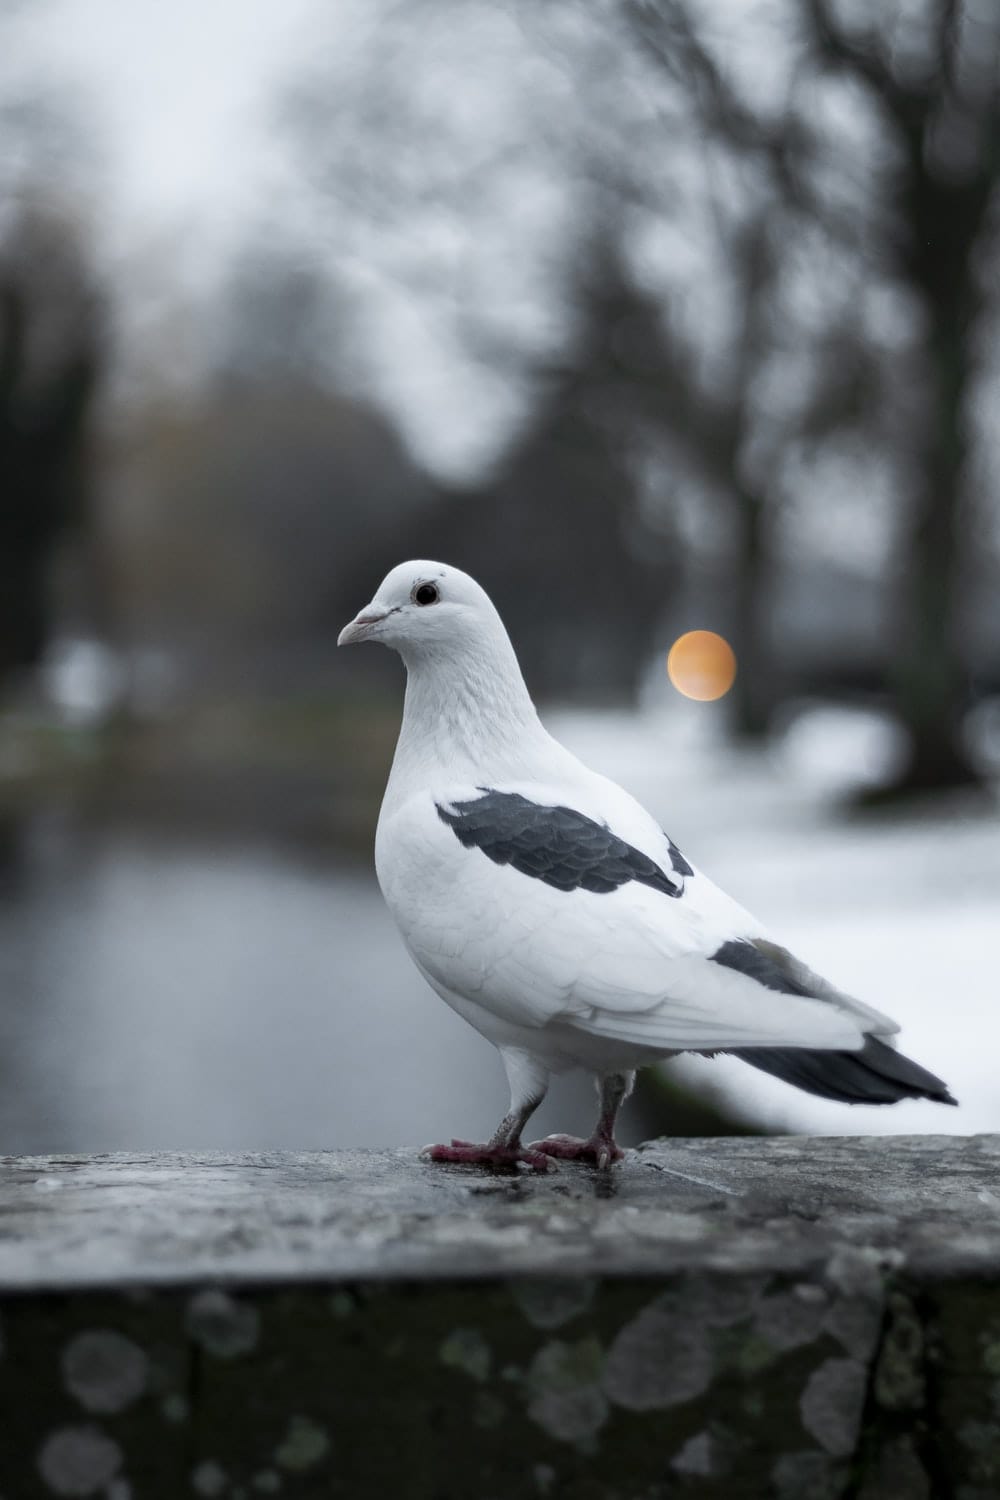 Cross Stitch | Pigeon - Tilt Shift Focus Photography Of White Pigeon - Cross Stitched